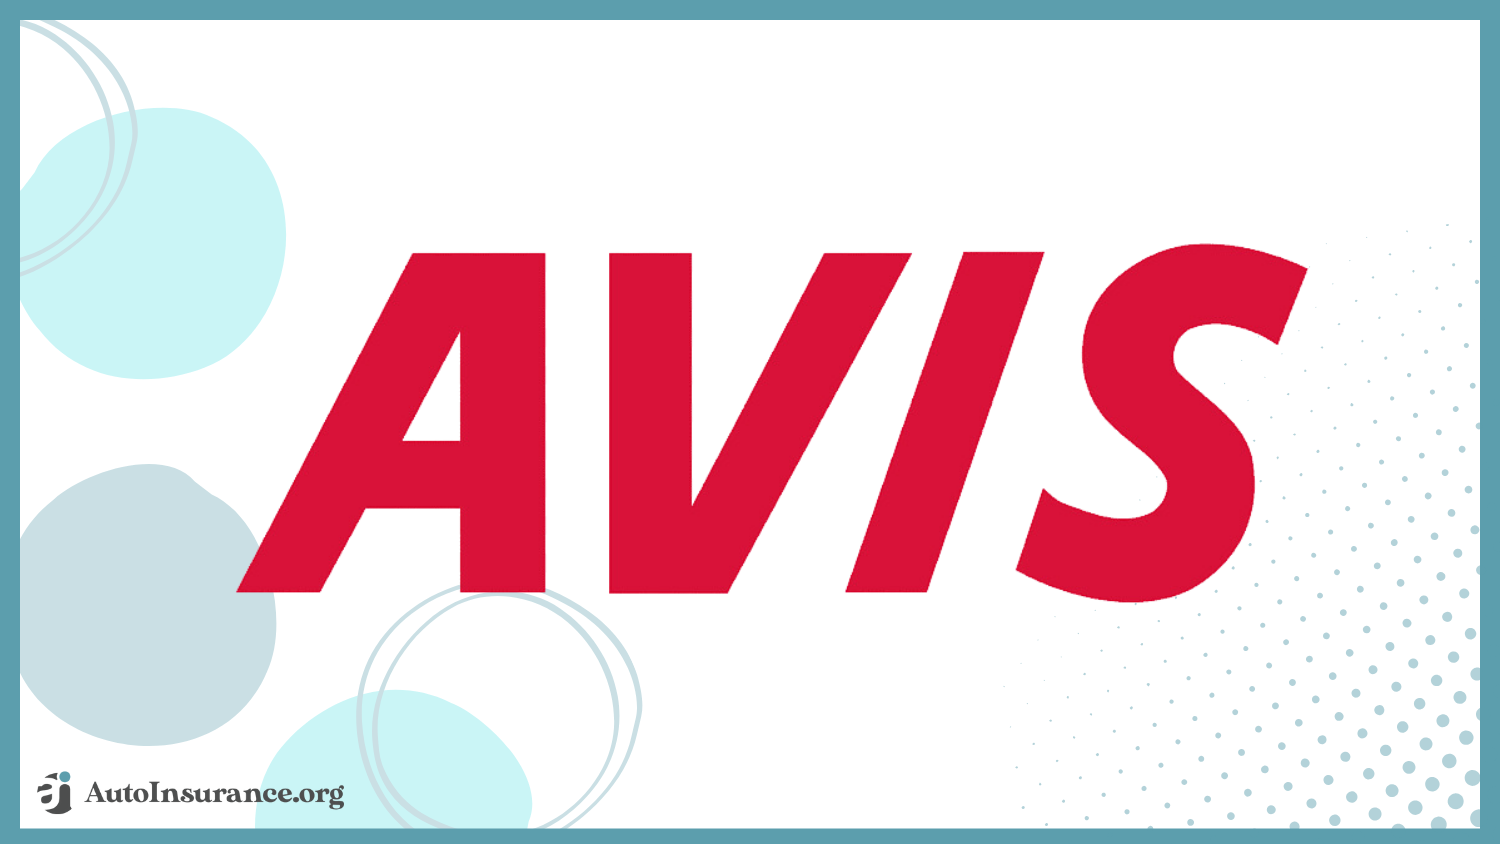 Avis: Best Rental Auto Insurance That Covers Additional Drivers